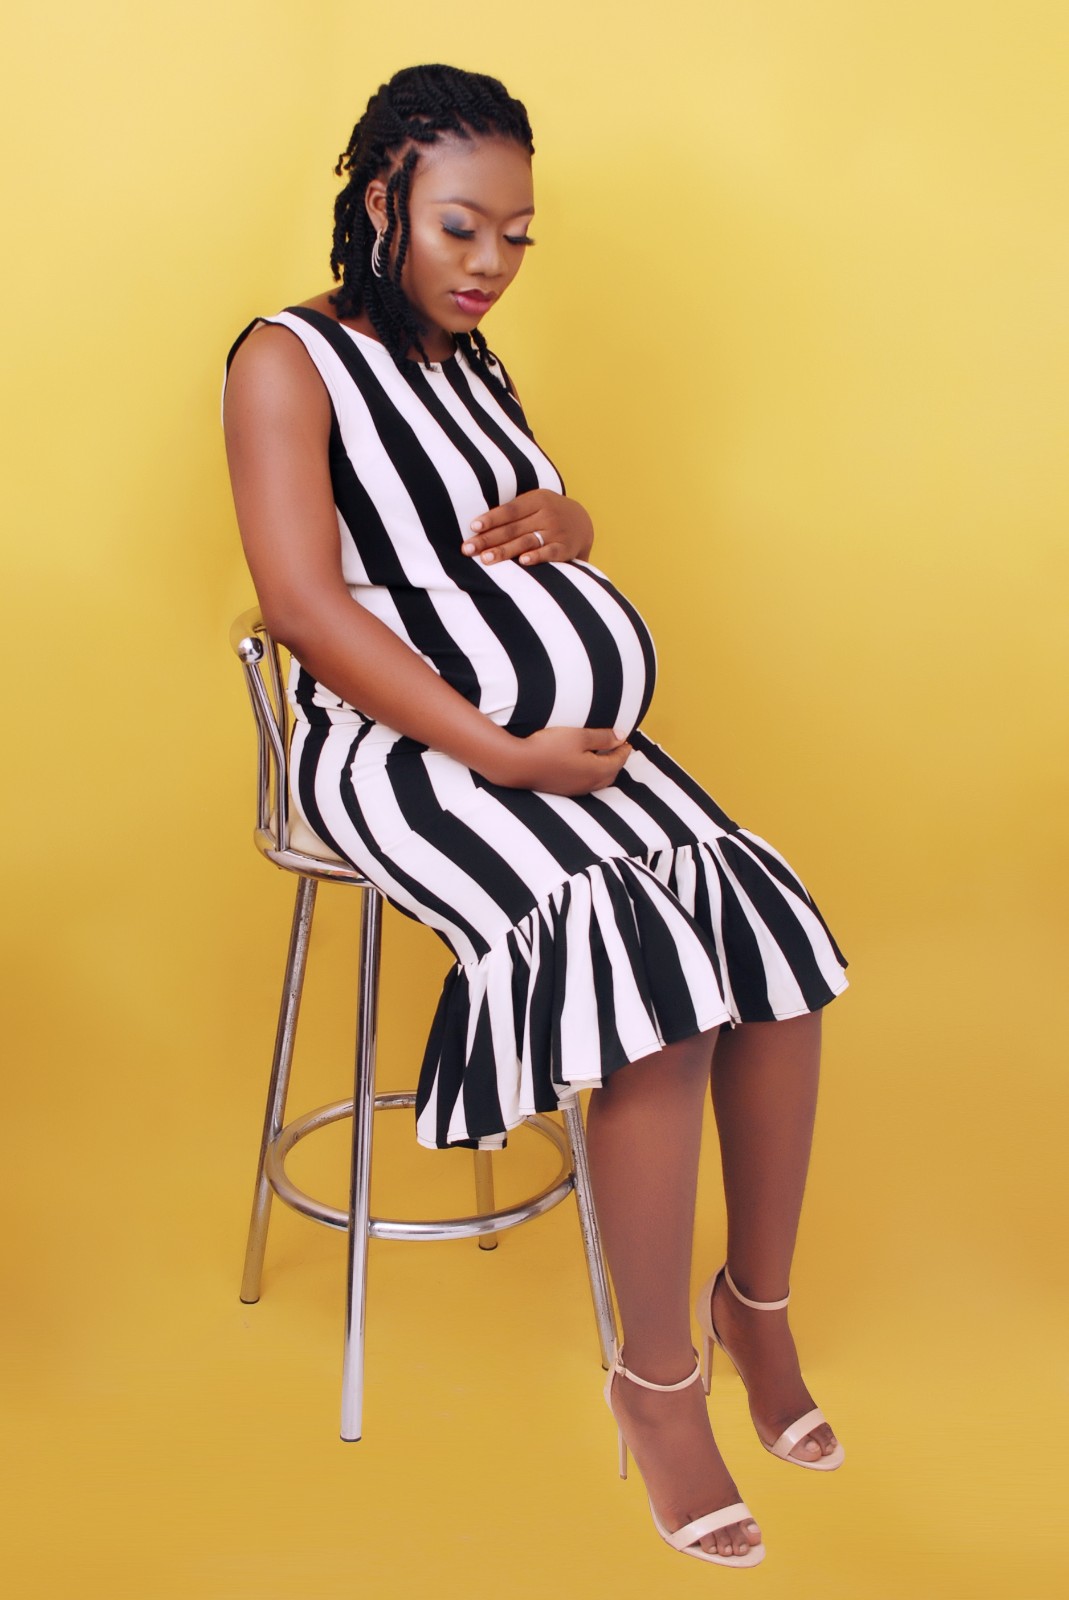 #MyHRDiary: My Pregnancy and Career Building Journey